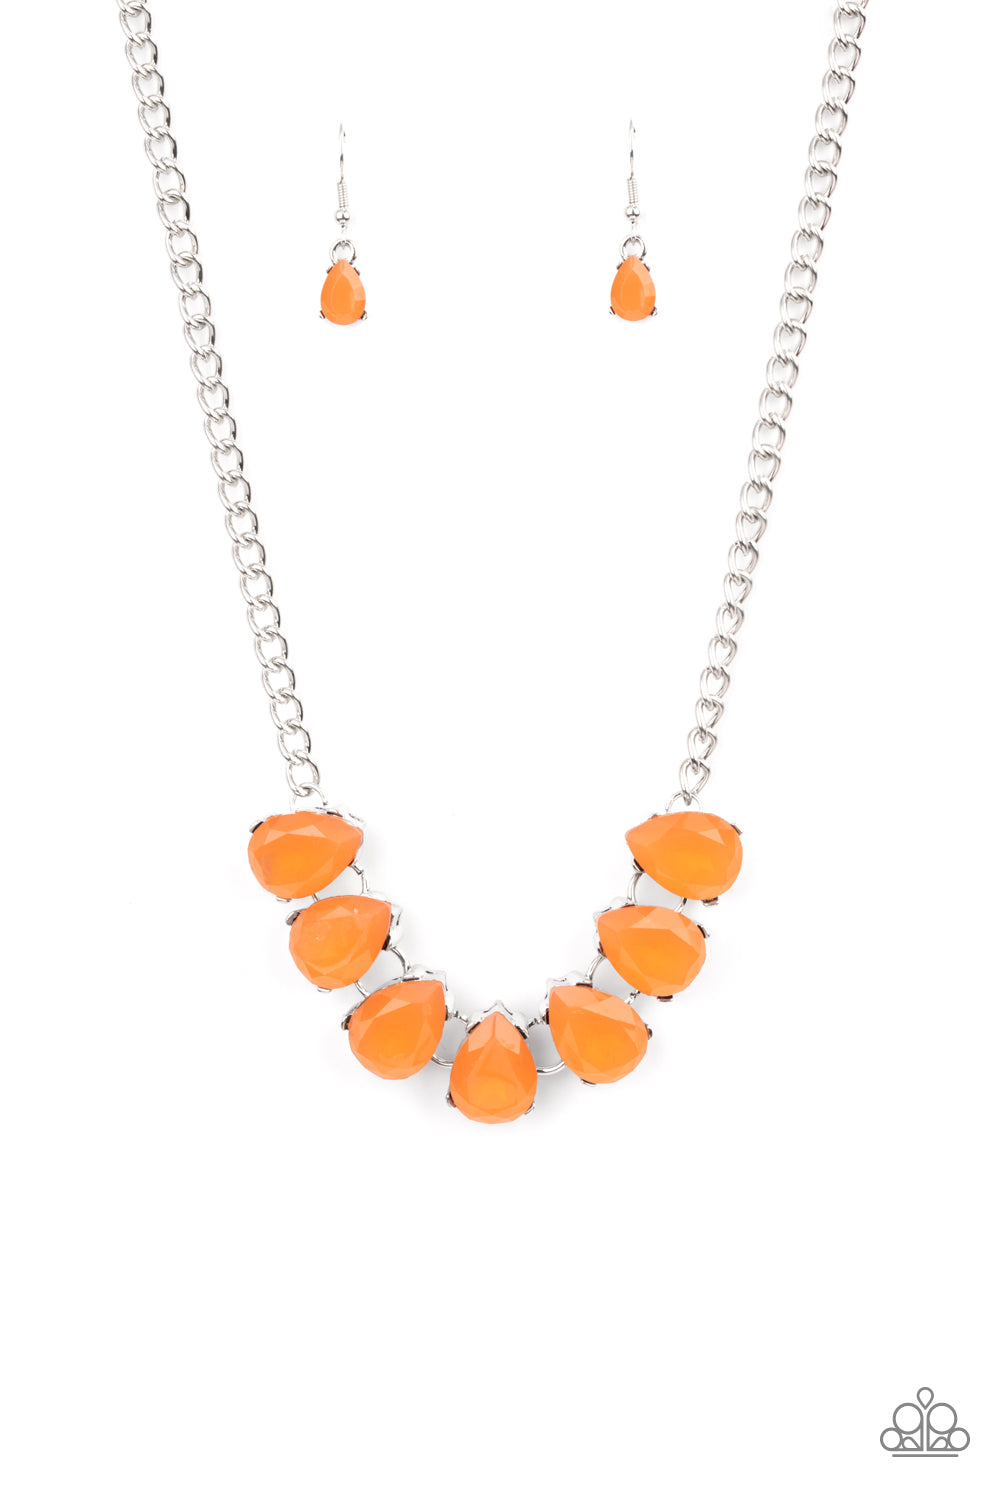 ABOVE THE CLOUDS - ORANGE NECKLACE